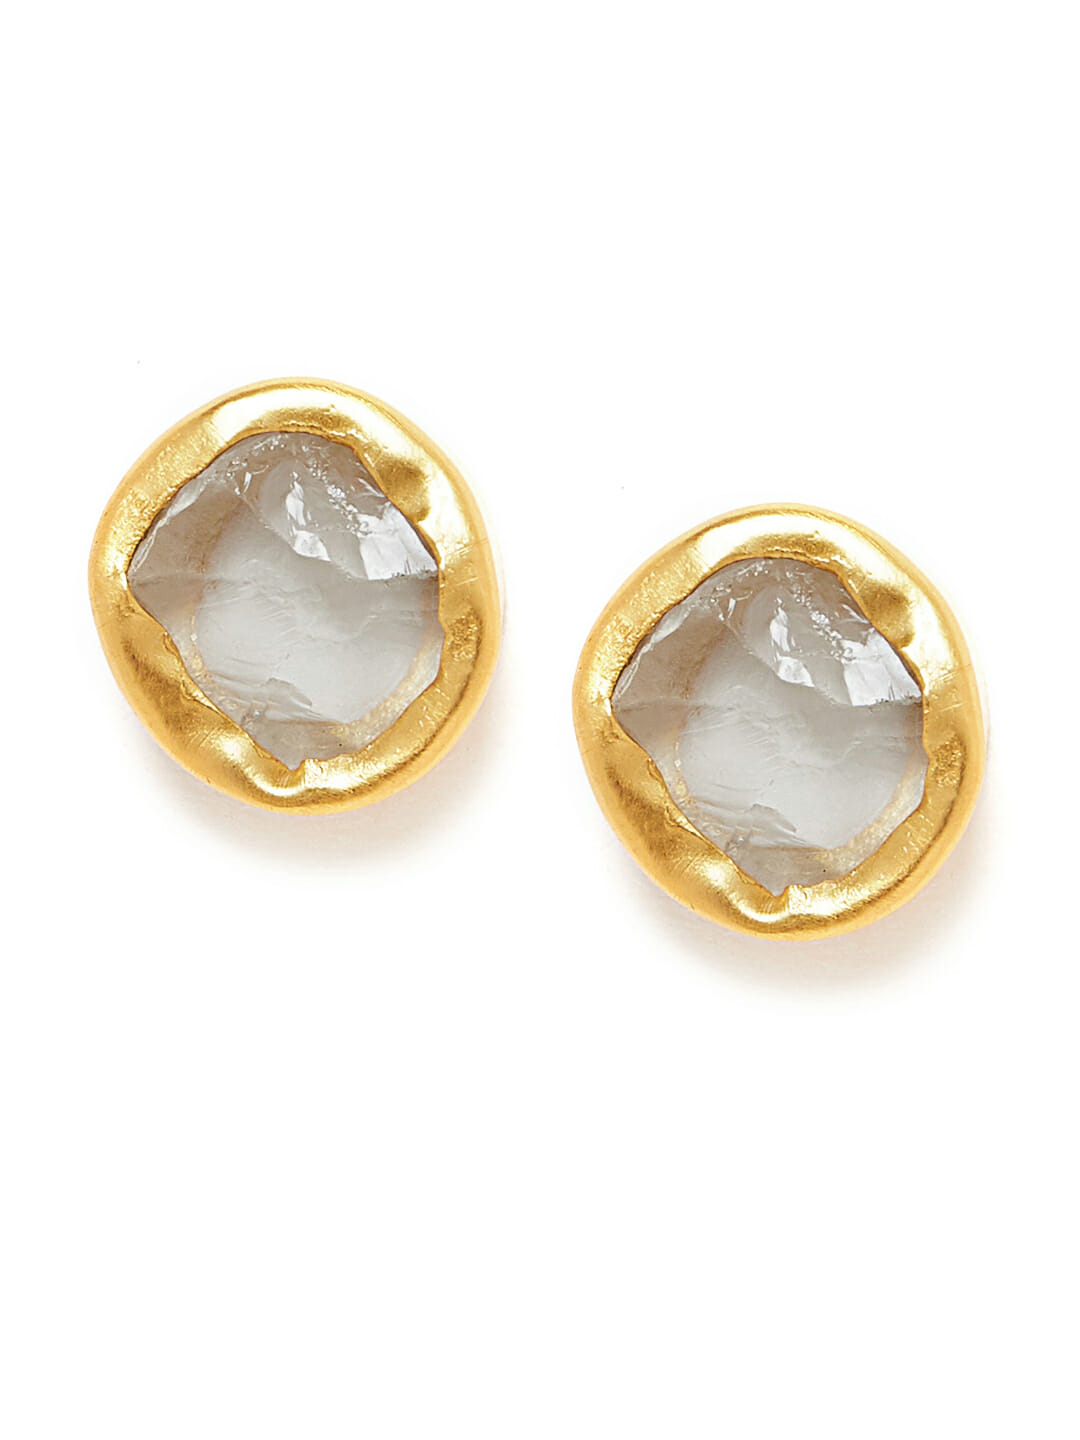 The Spirited Gold Studs Earrings with Green Amethyst